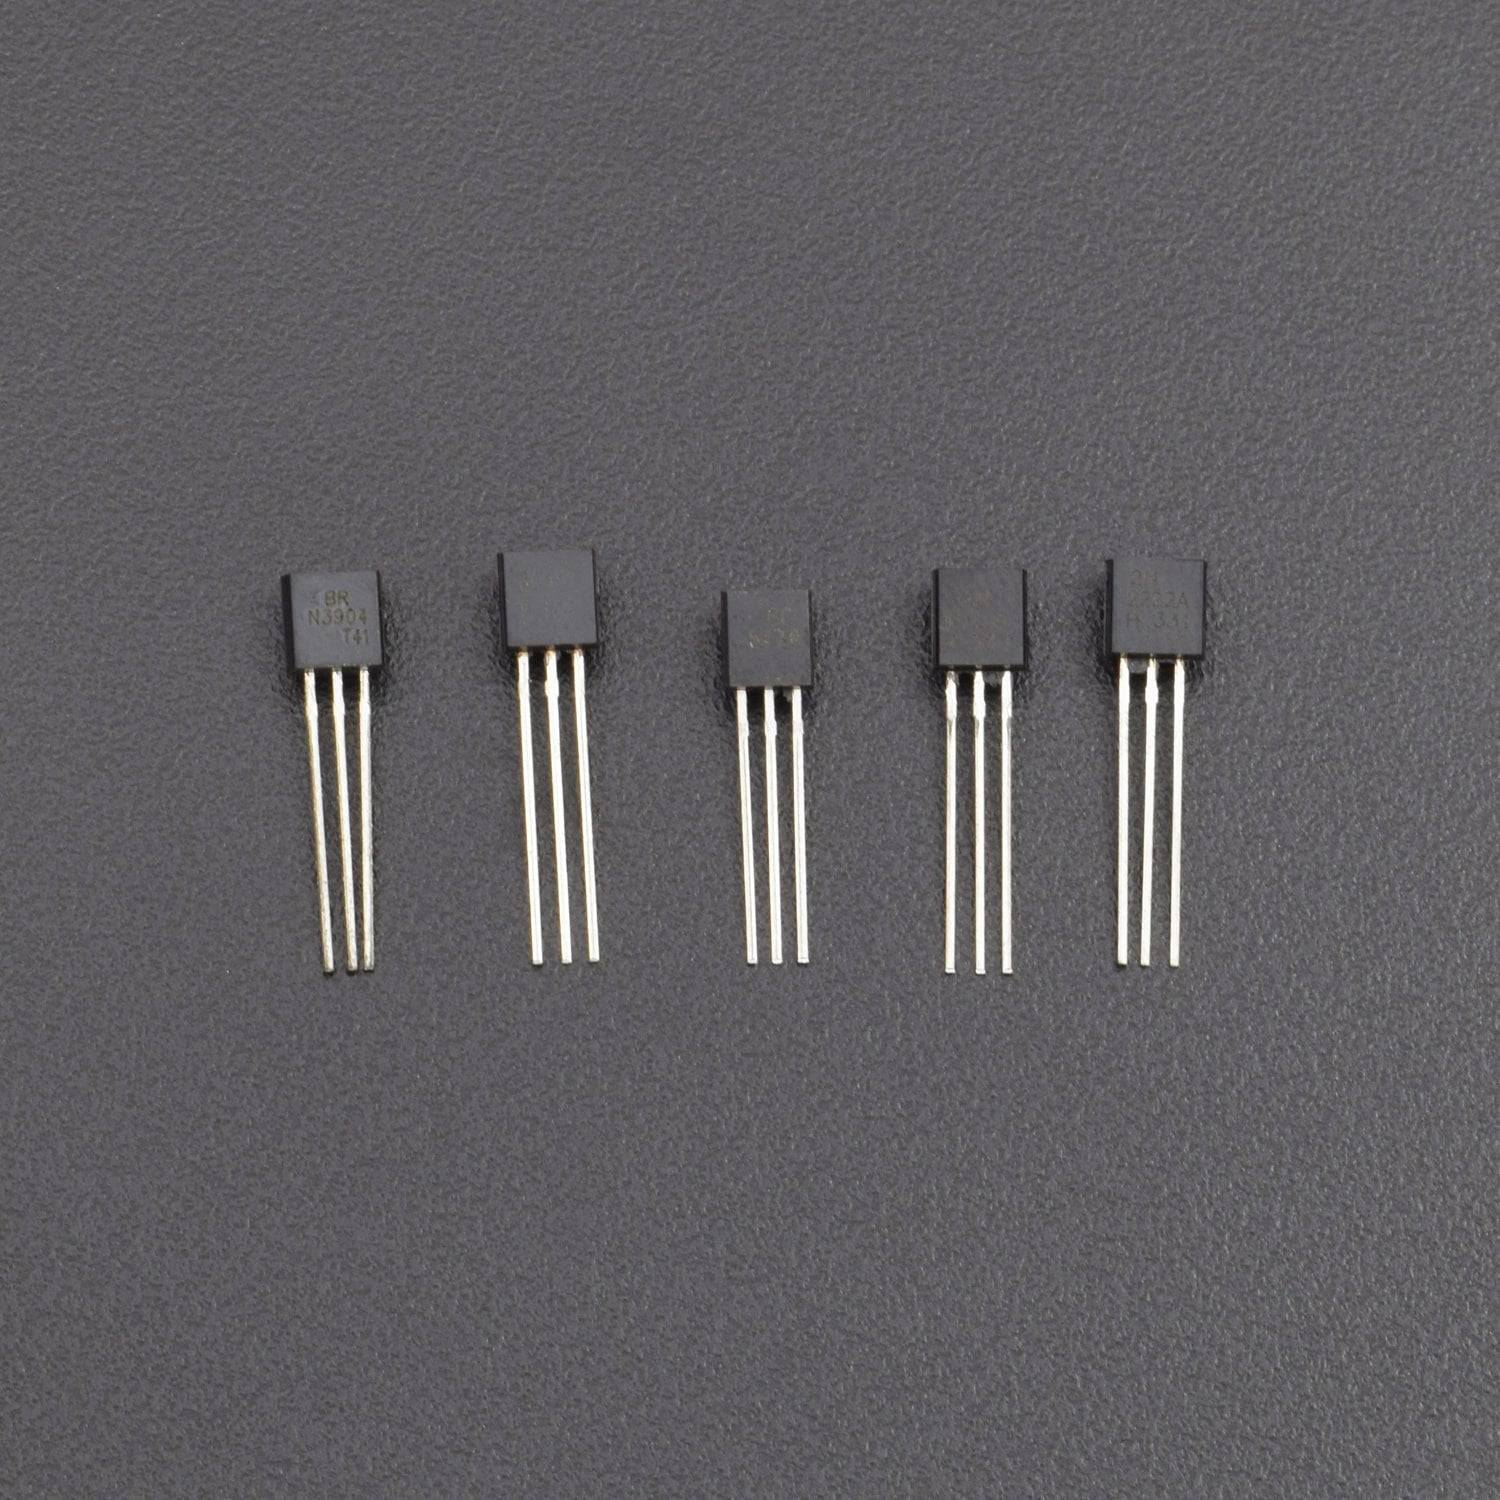 Assorted transistors combo BC547 BC557 2N2222 2N3904 2N3906 NPN PNP 20 pieces each - RS757 - REES52